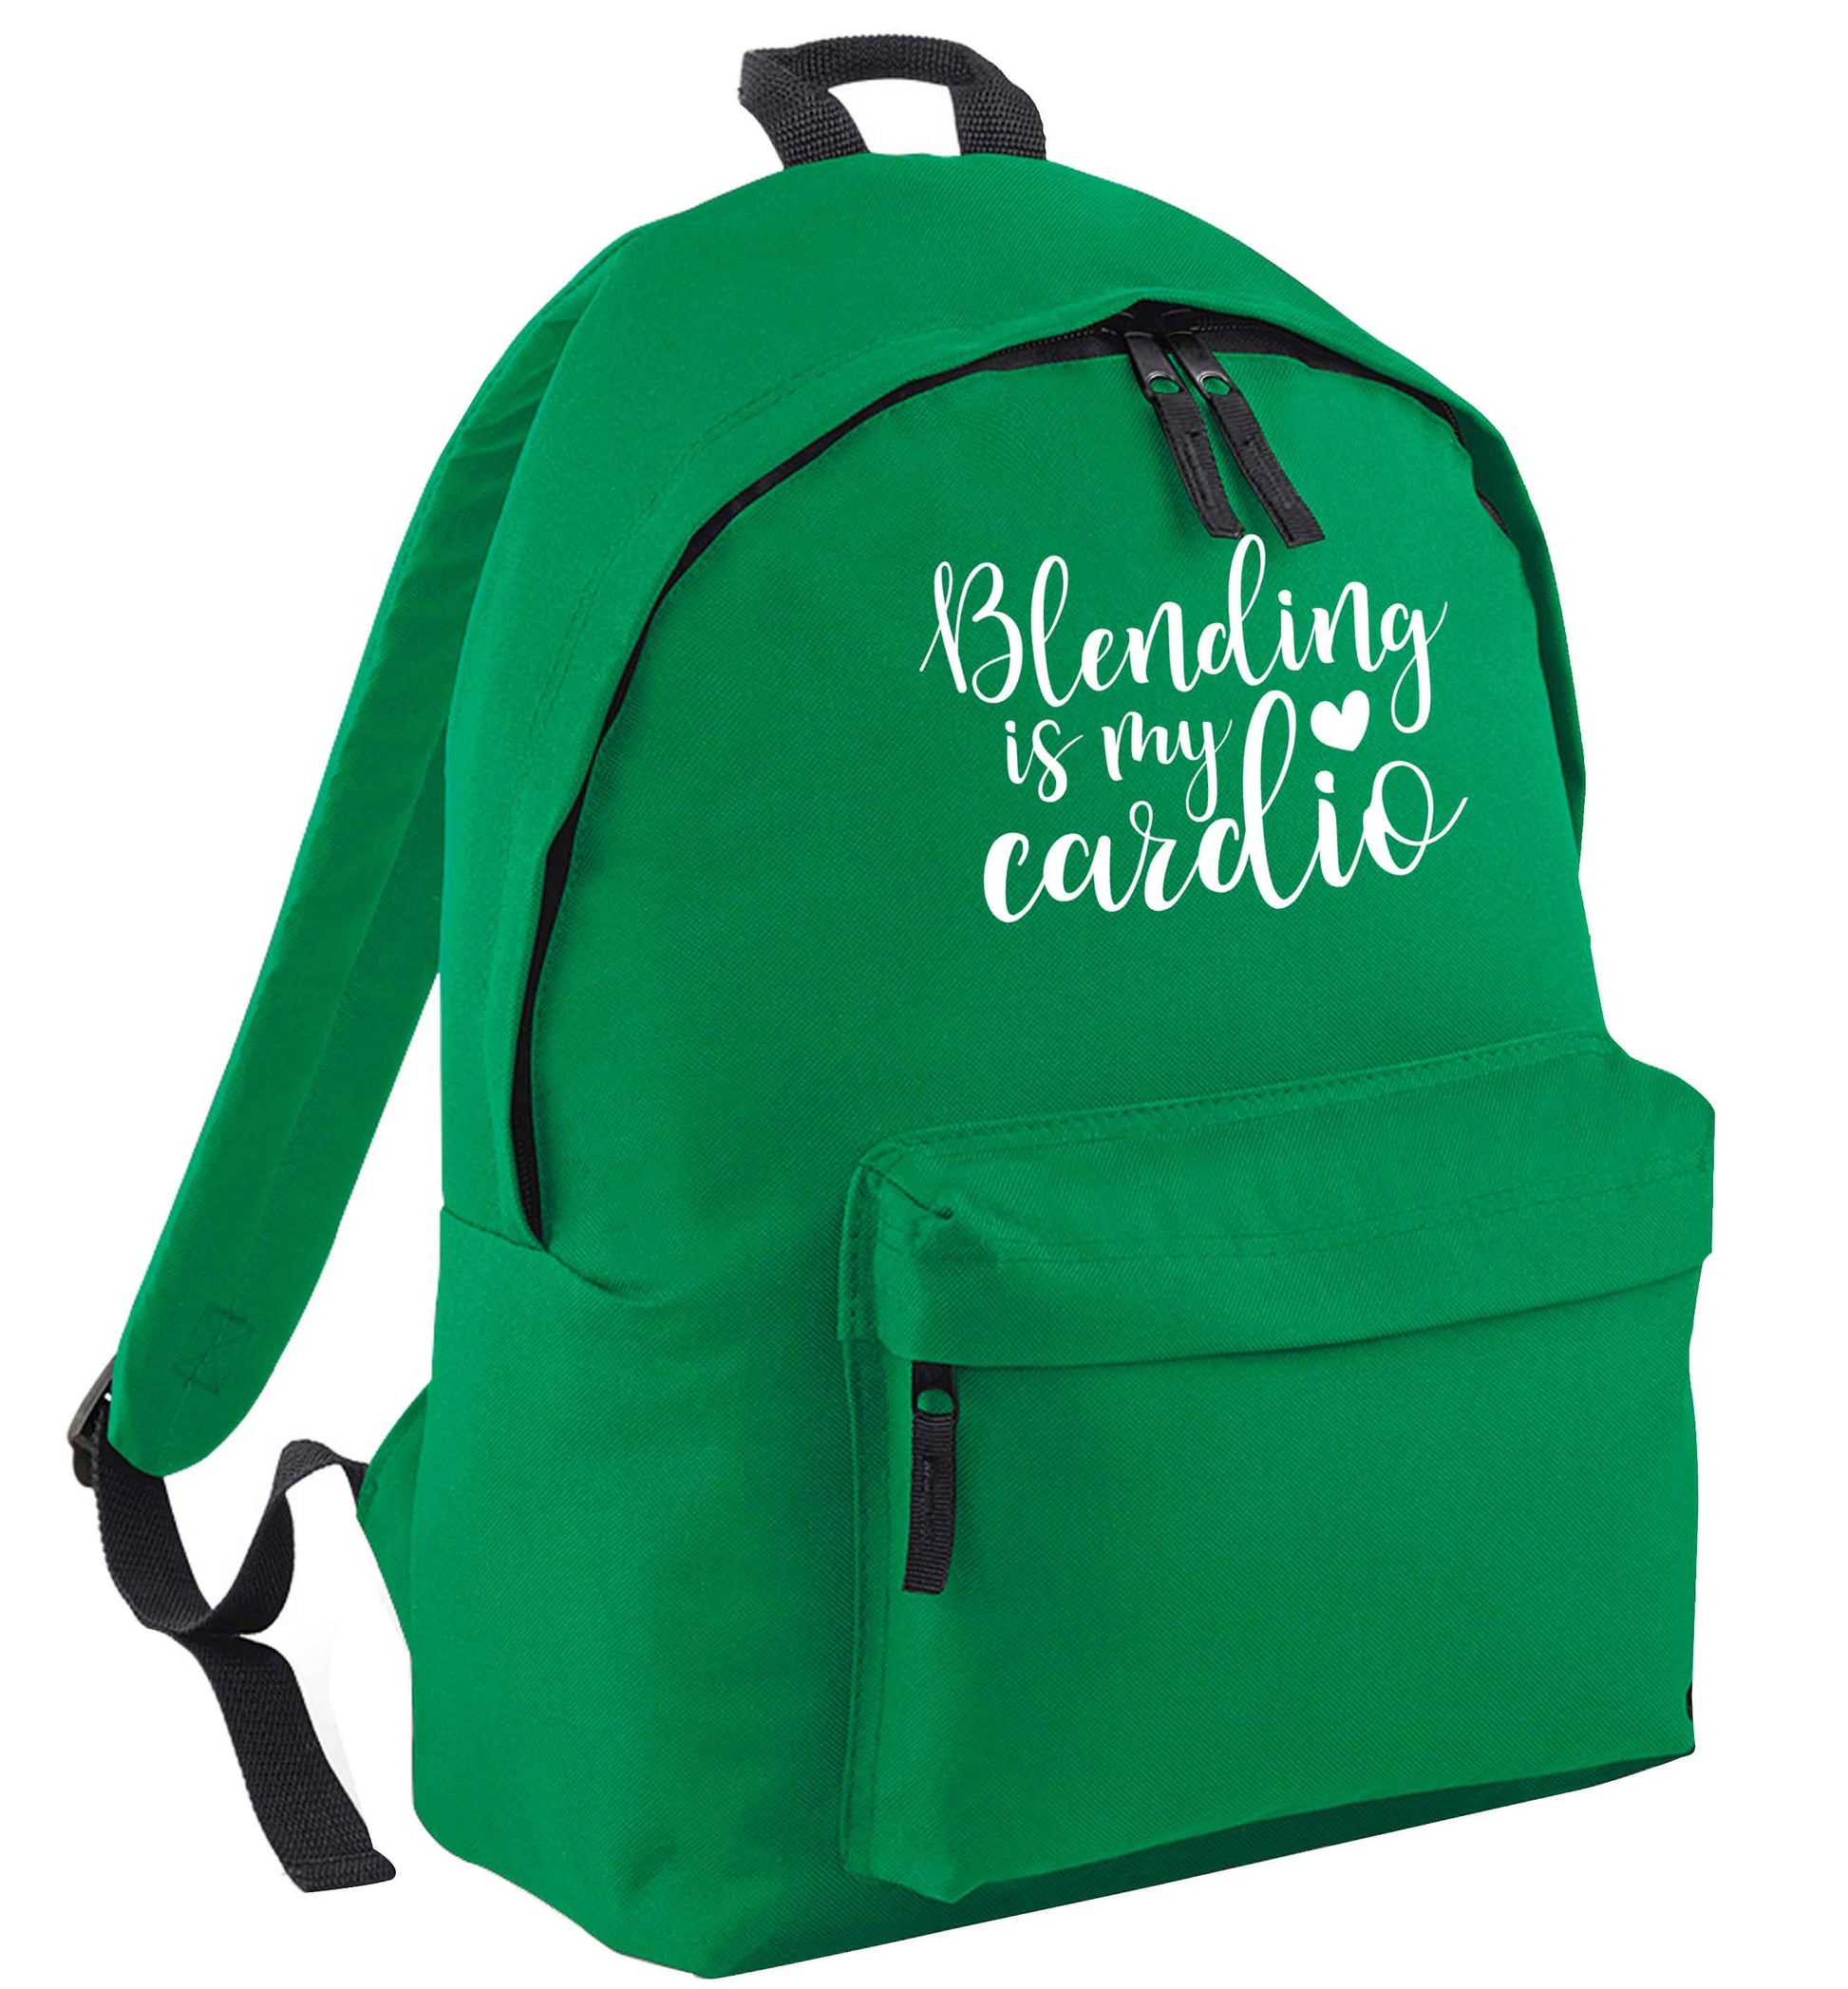 Blending is my cardio green adults backpack